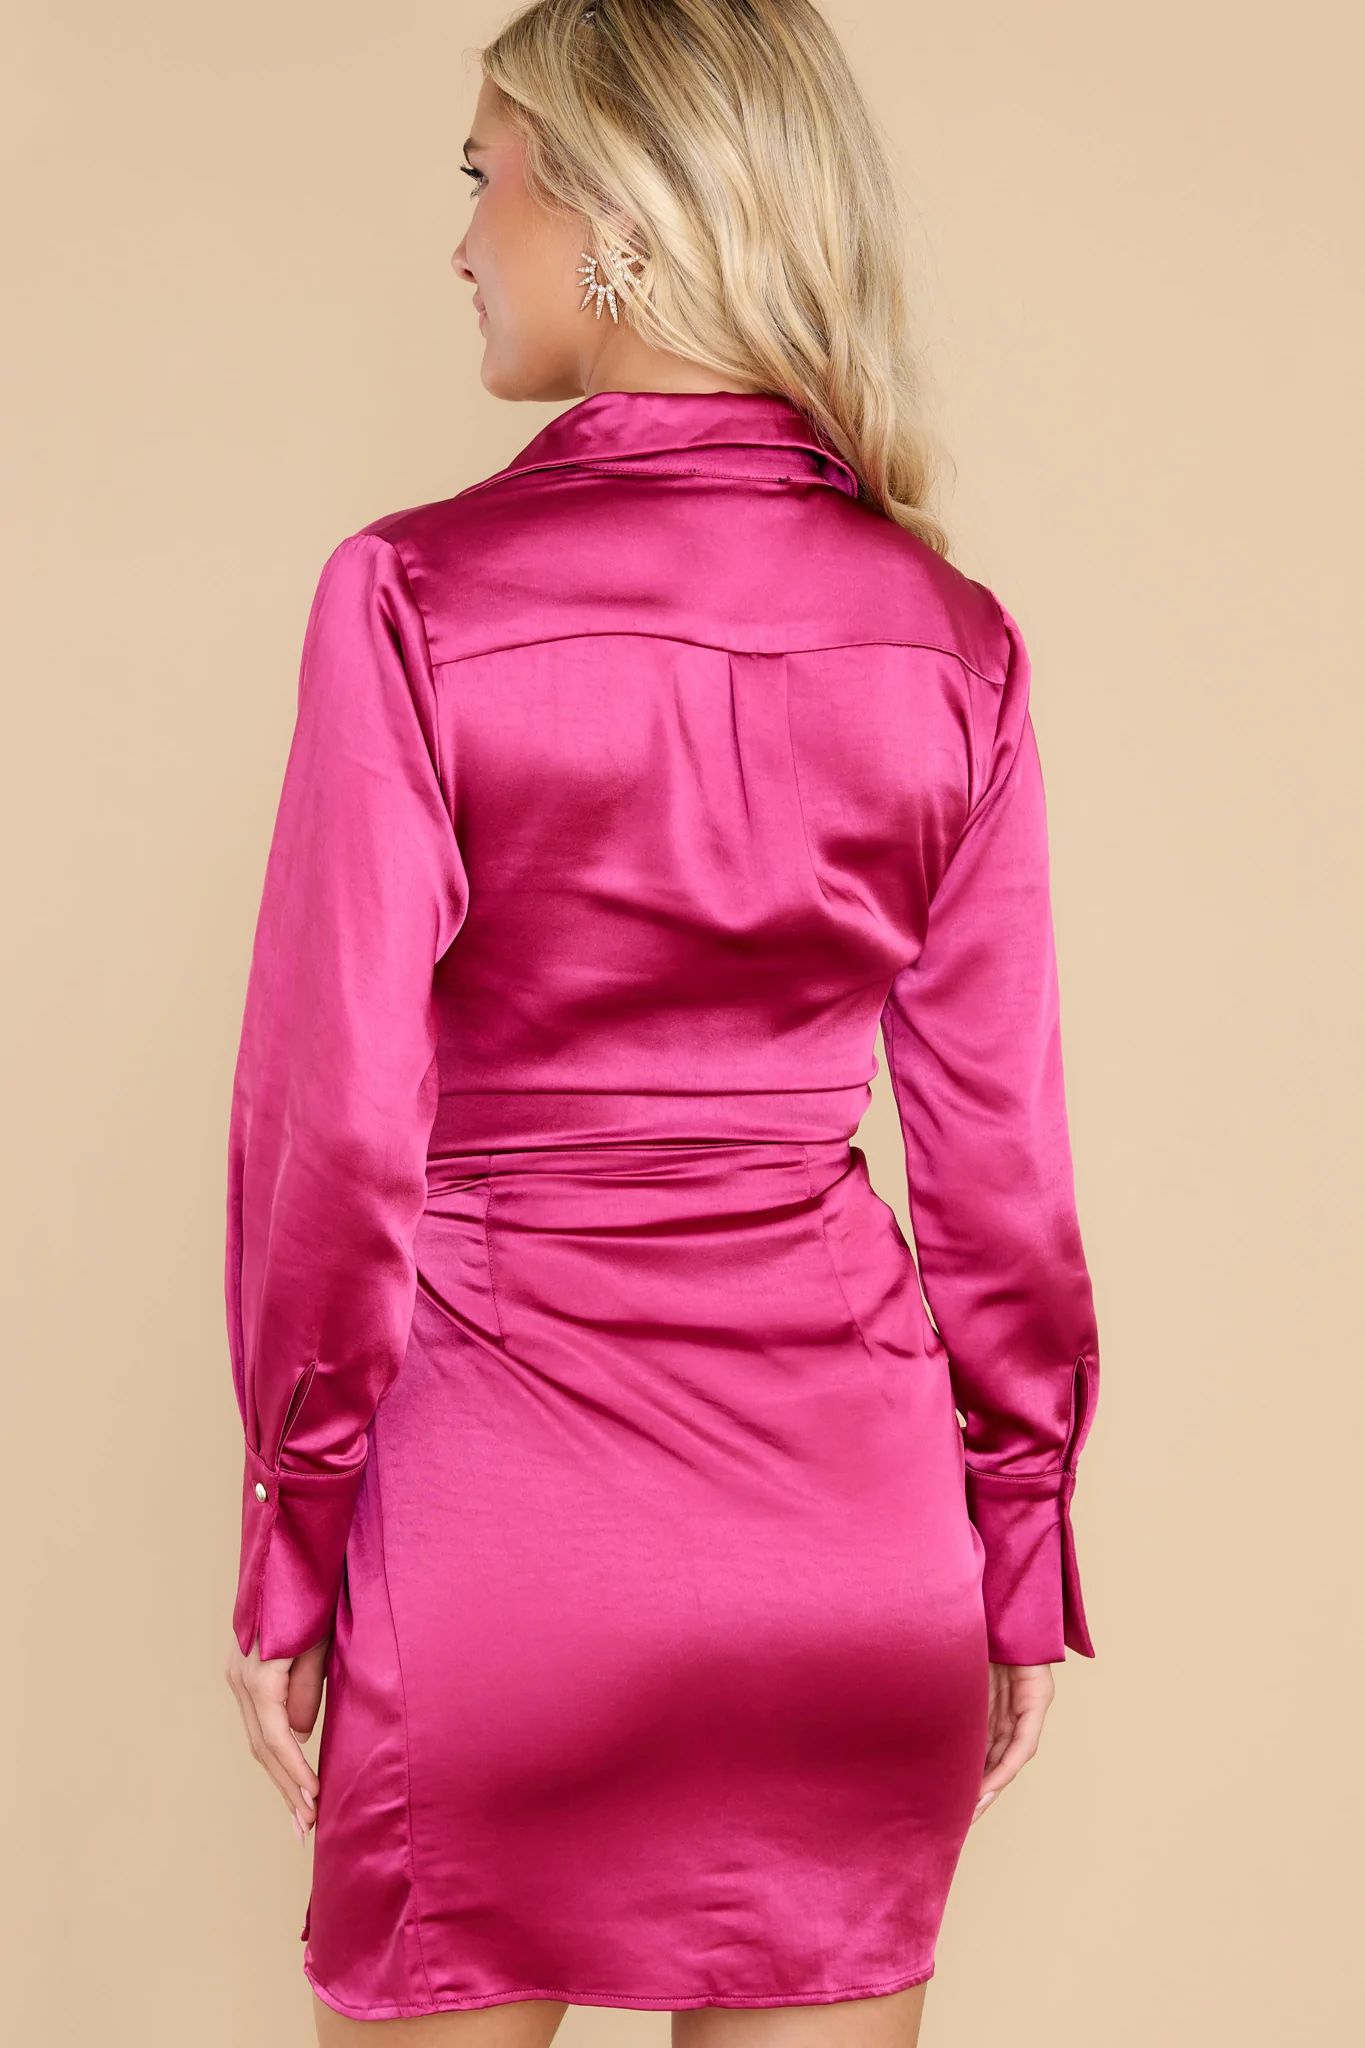 Tailored For Me Fuchsia Pink Satin Dress | Red Dress 